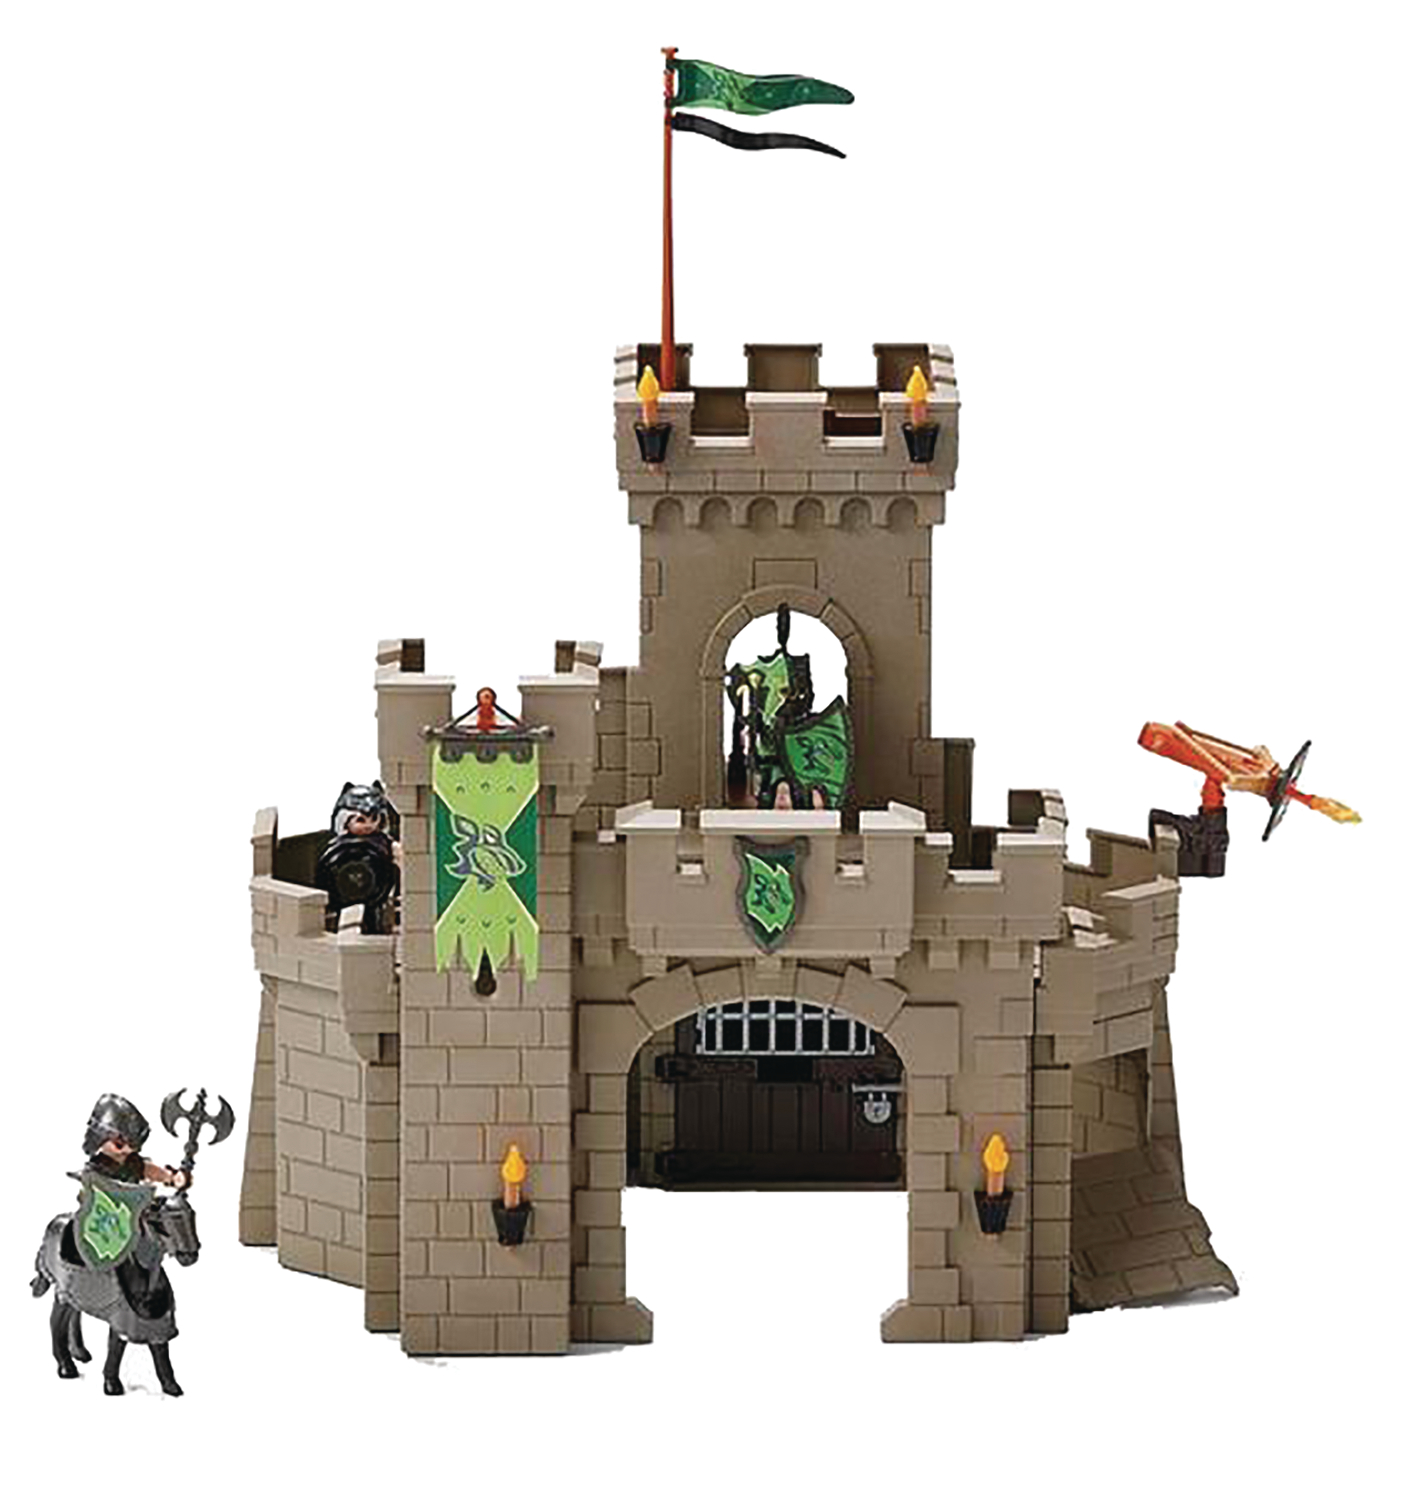 SEP178524 - PLAYMOBIL WOLF KNIGHTS CASTLE - Previews World